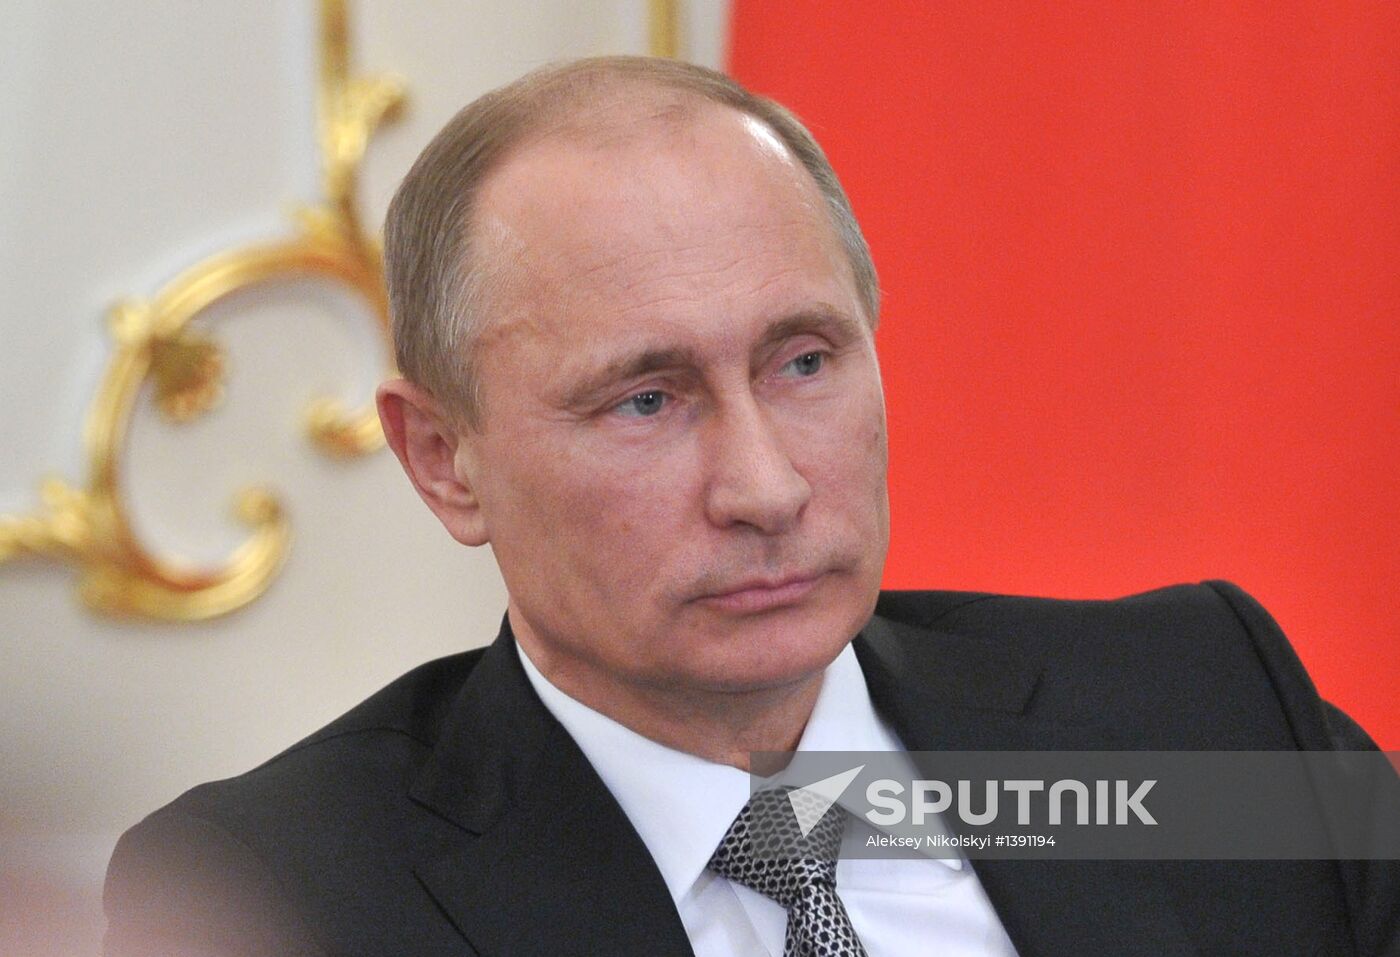 V.Putin chairs meeting on national projects & demographic policy